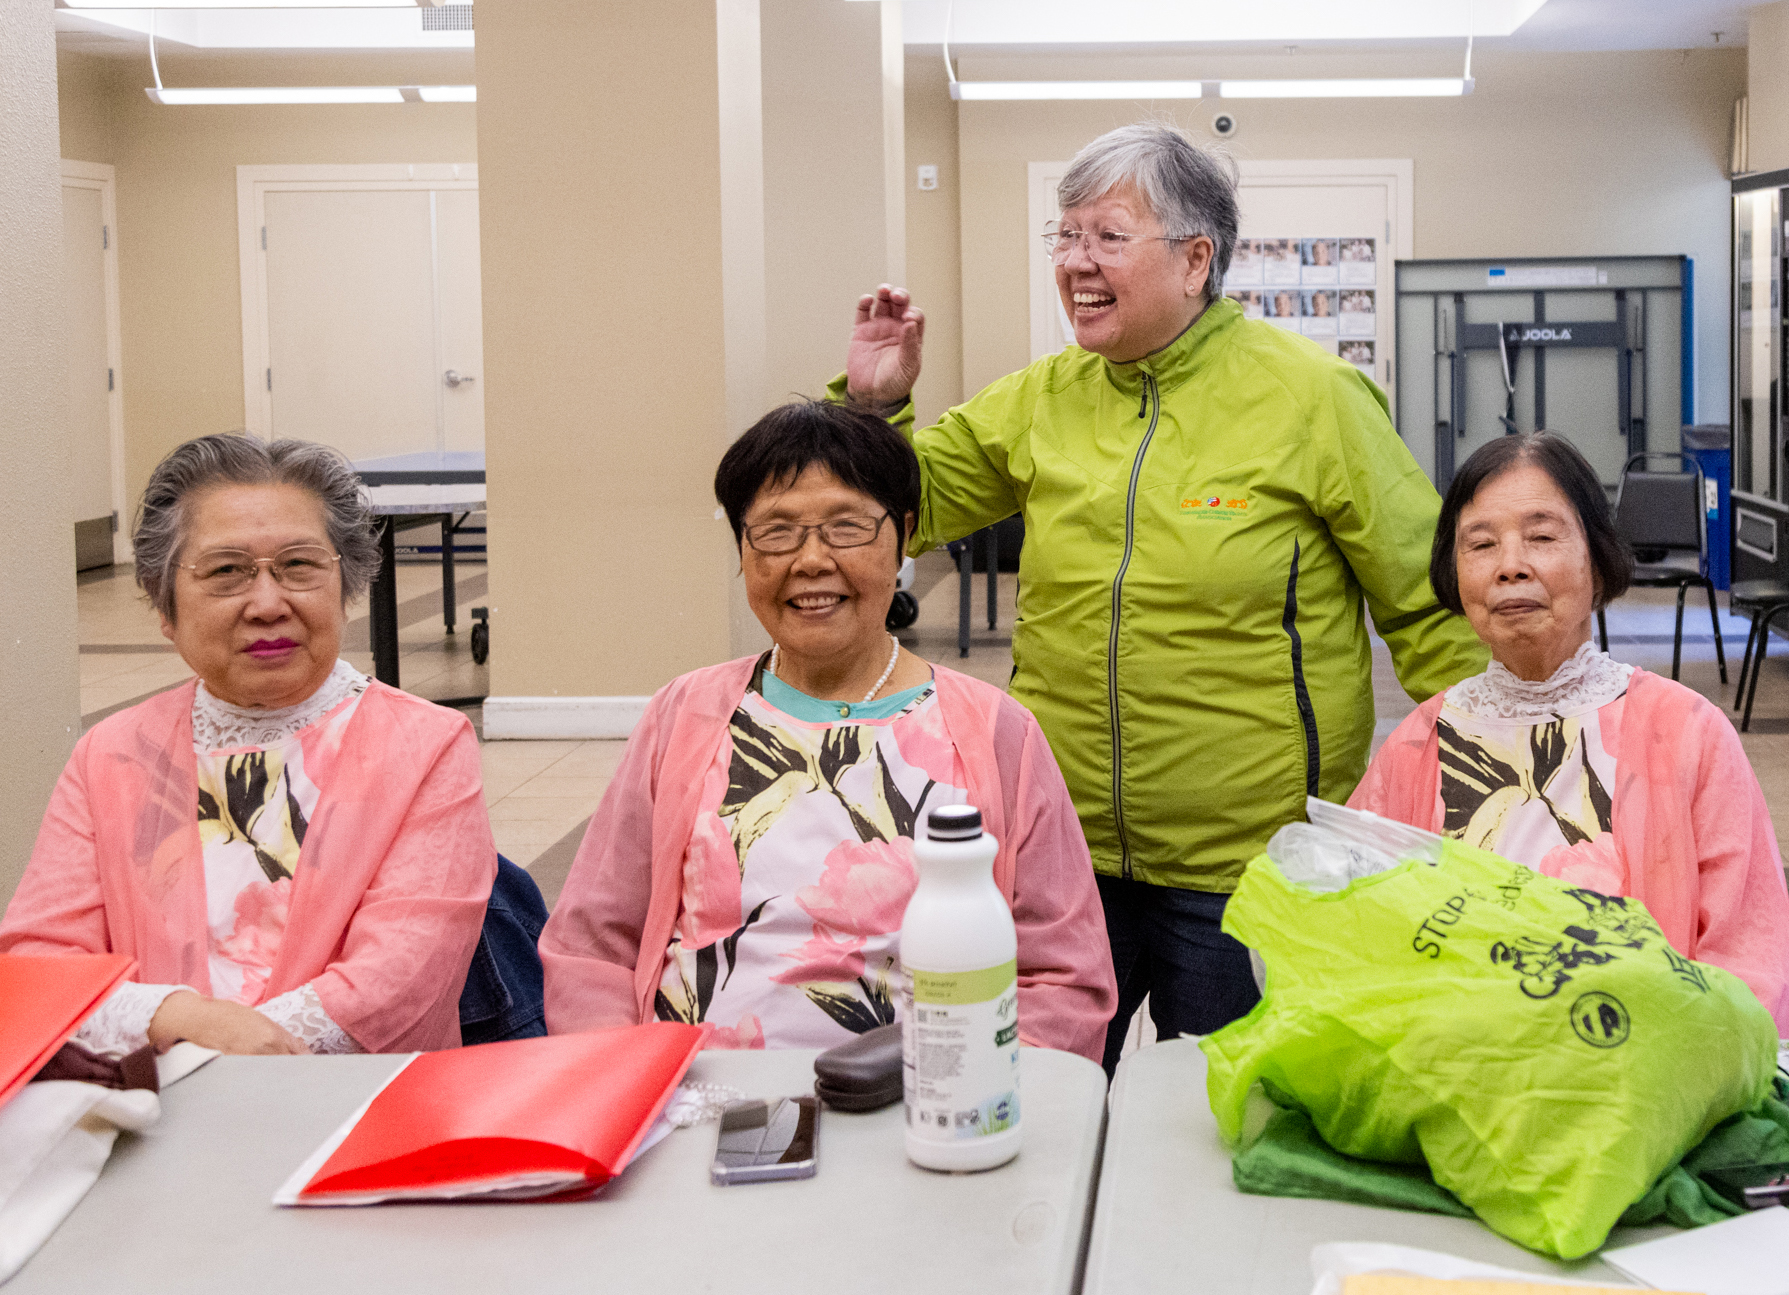 Four senior women in a community room, three seated and wearing pink smocks, one standing in a green jacket, all appear cheerful.